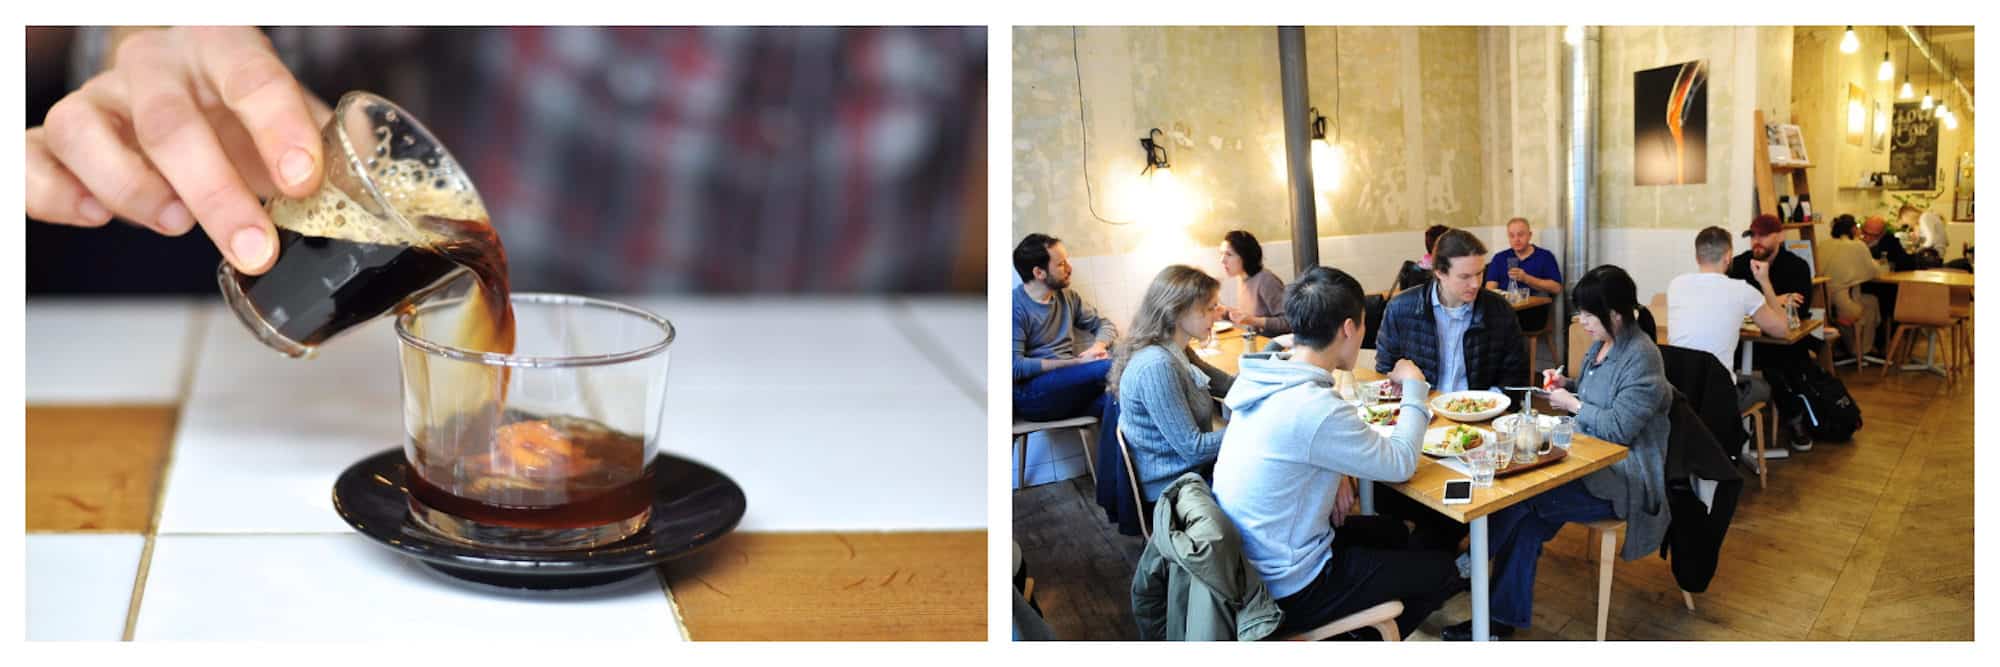 Someone serving coffee into a glass cup on a tiled counter at gluten-free Paris coffee shop Coutume (left). Inside gluten-free Paris coffee shop Coutume with people enjoying breakfast (right).